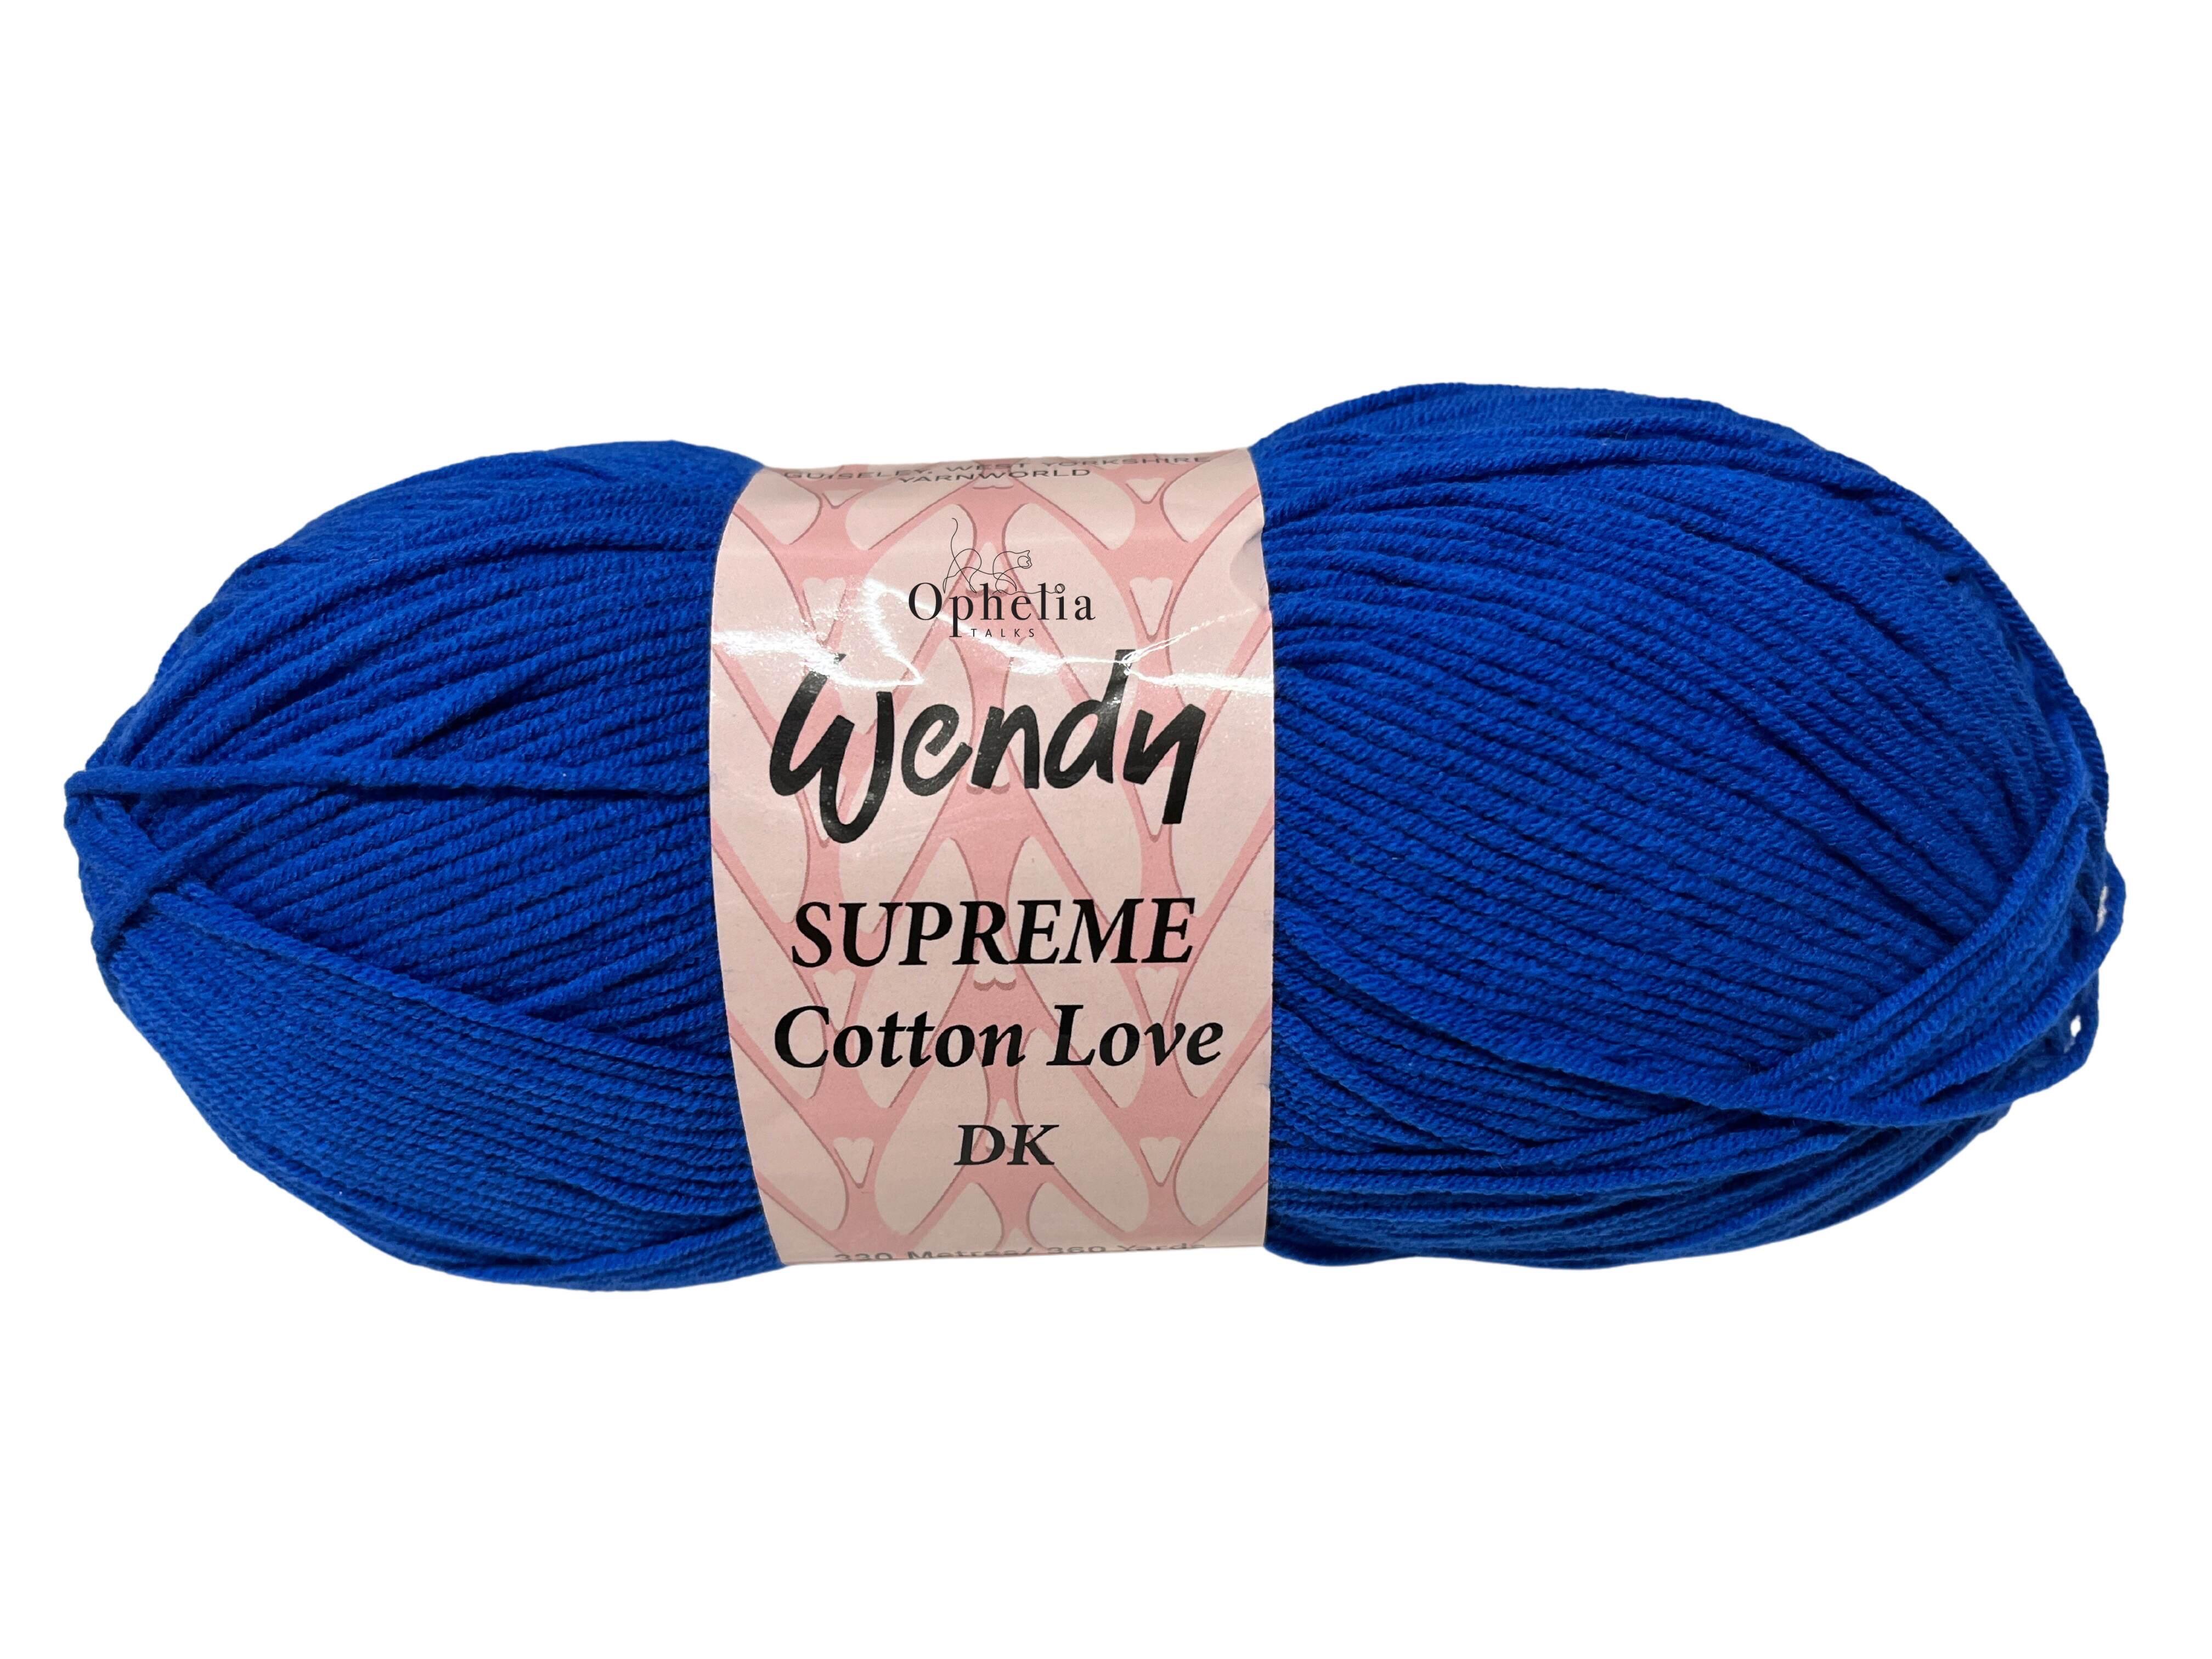 Wendy supreme cotton love in the colour Royal WCT10